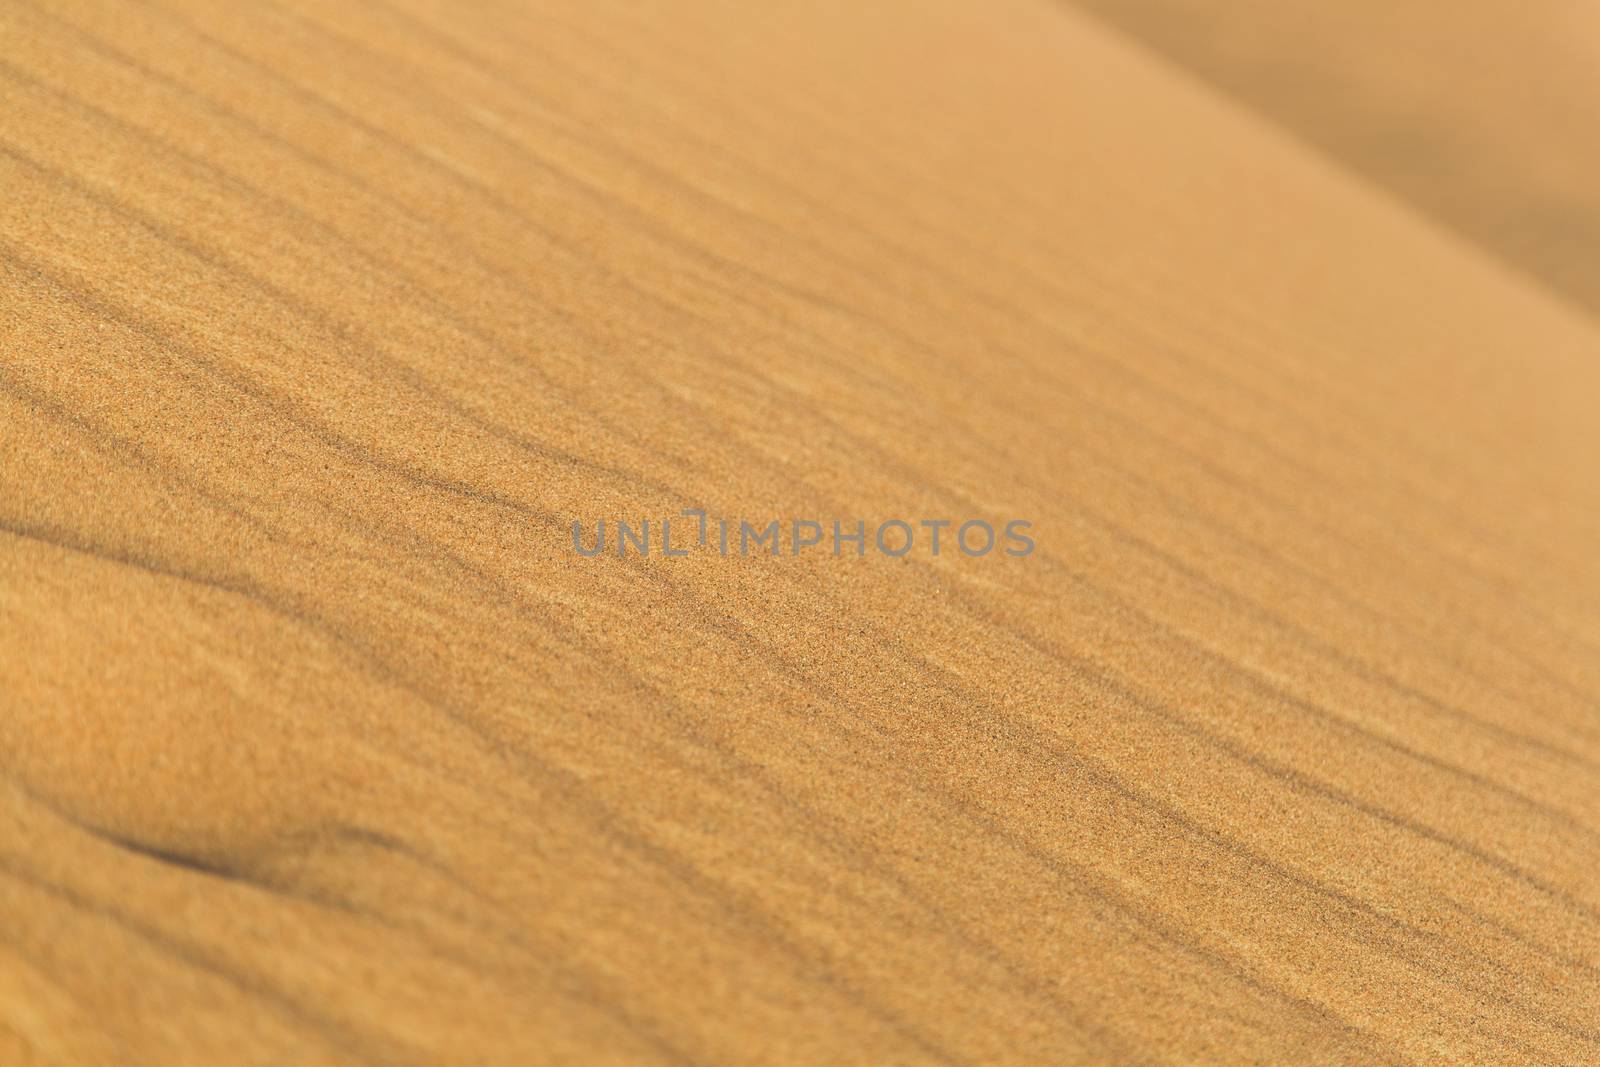 Background of the desert with a deep of field of the stripes made by the wind. The photo was shot from a top view in a sunny day.